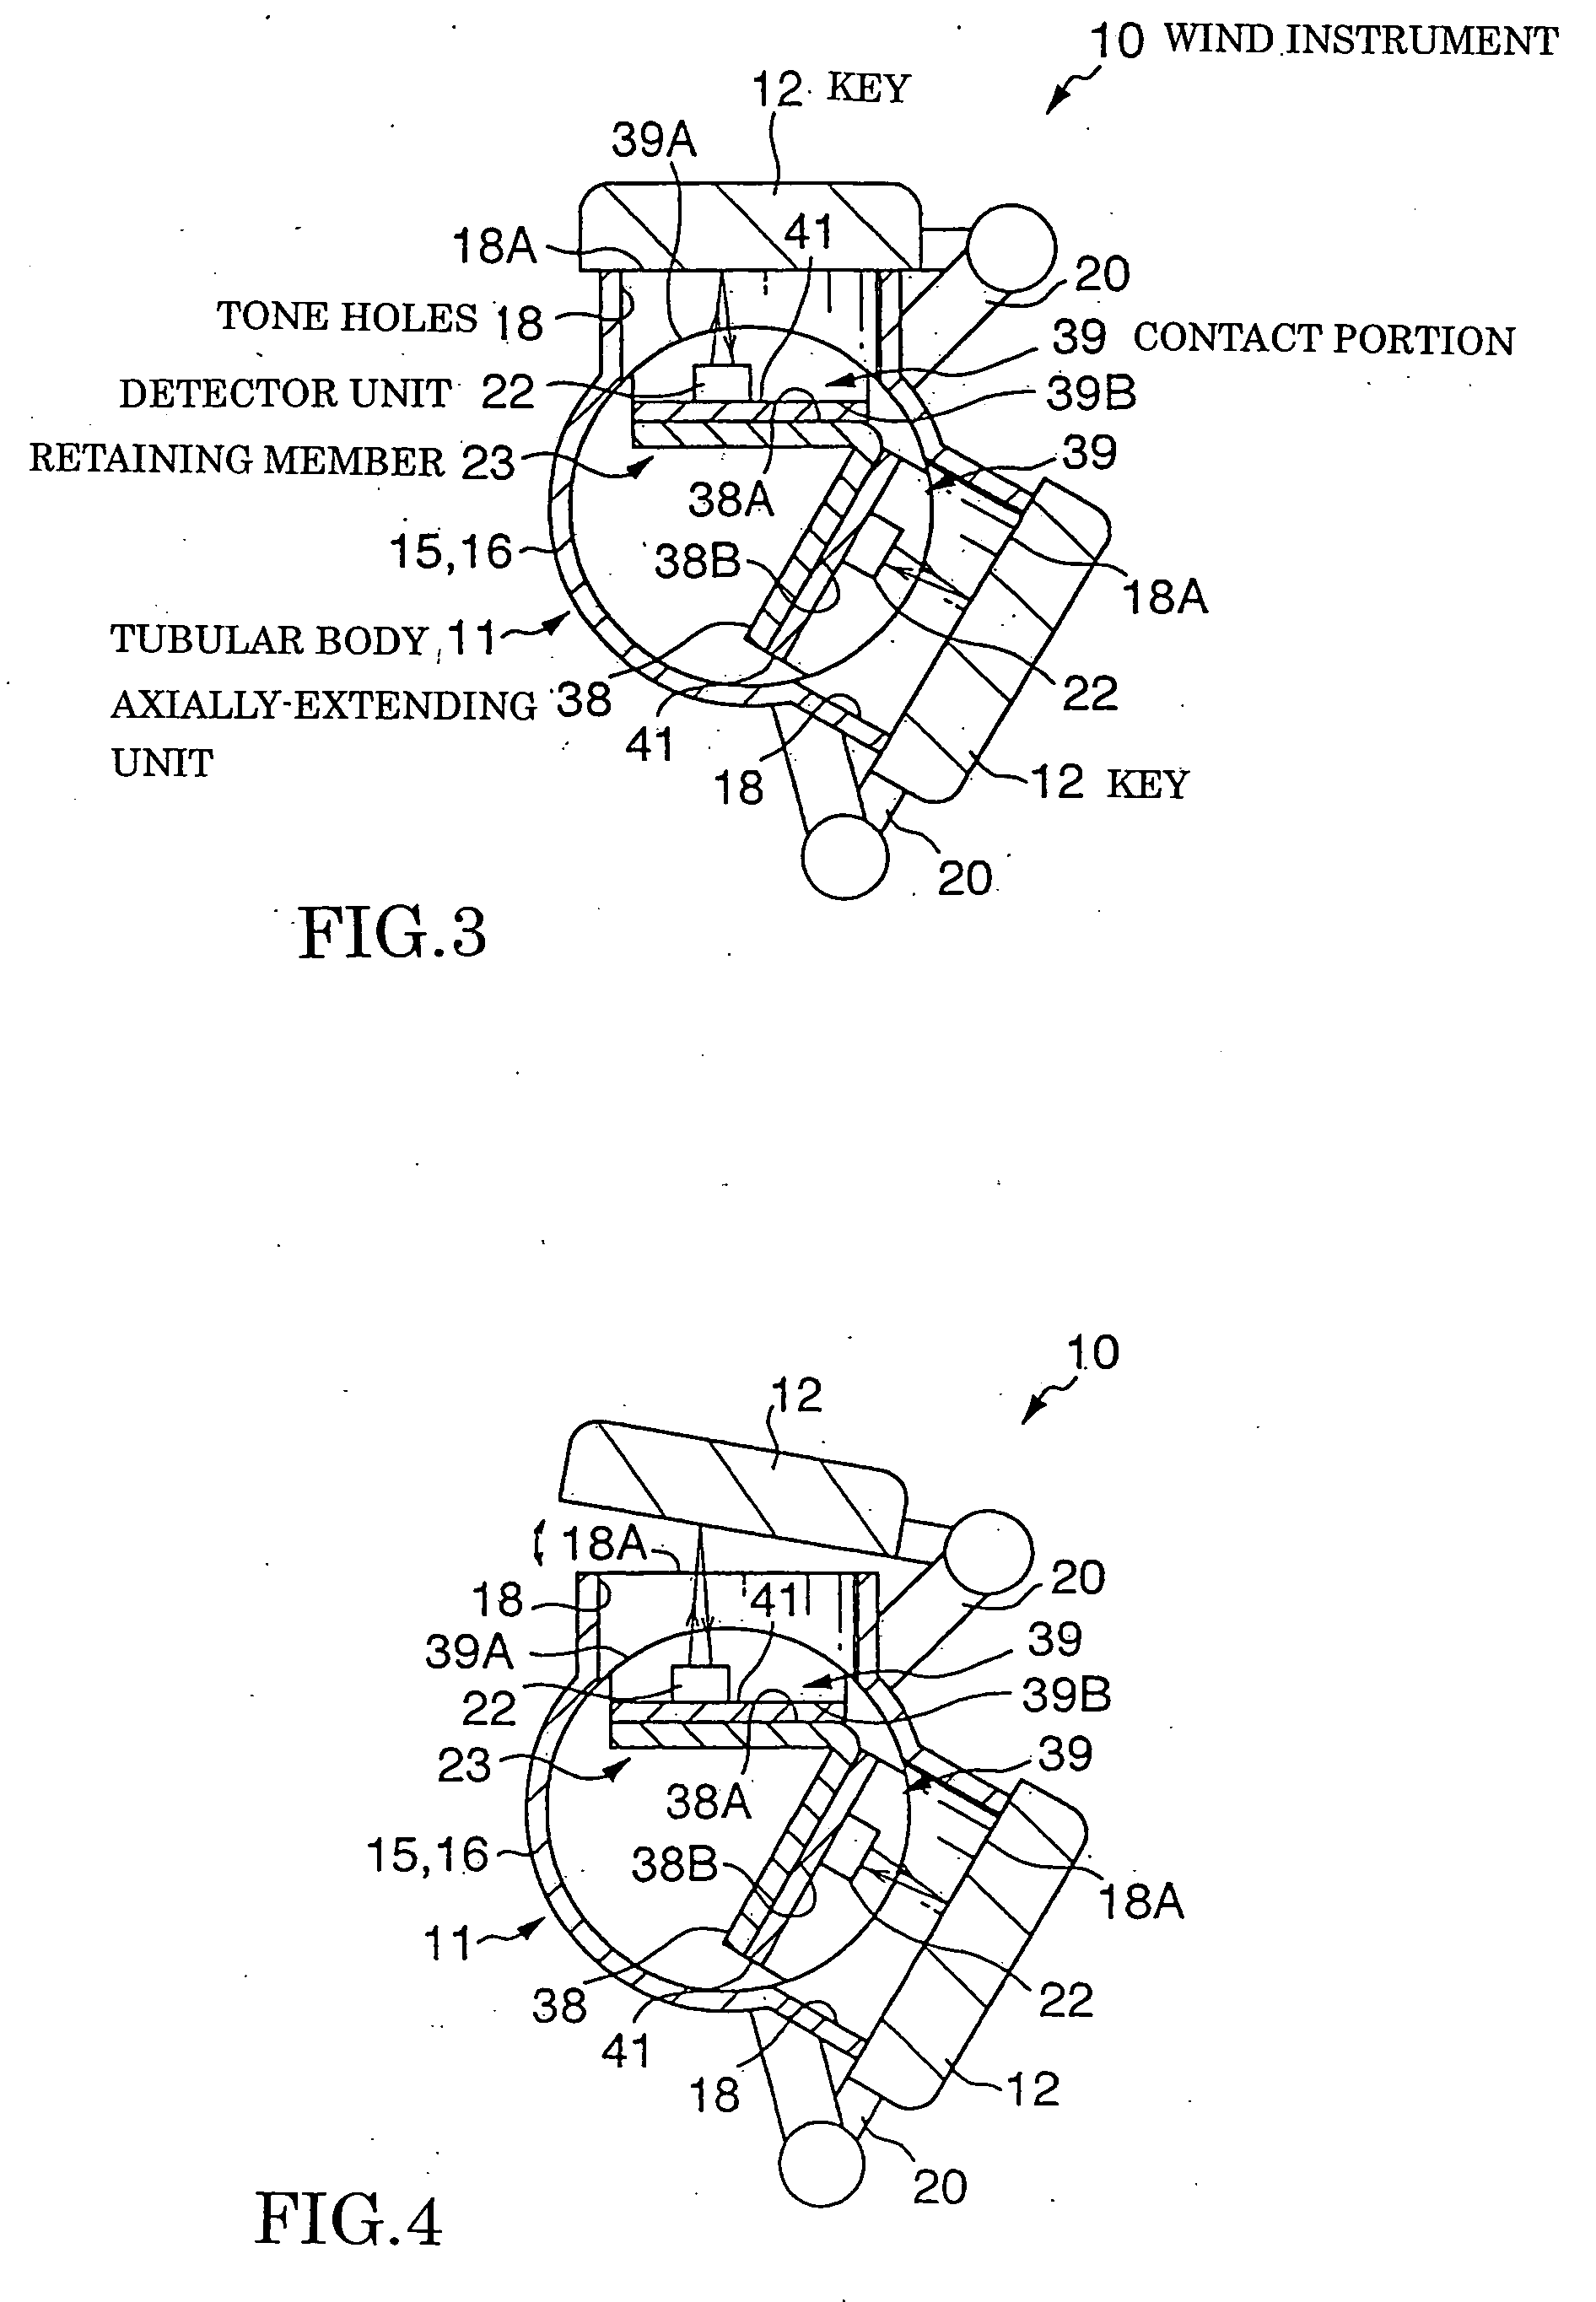 Key detection structure for wind instrument